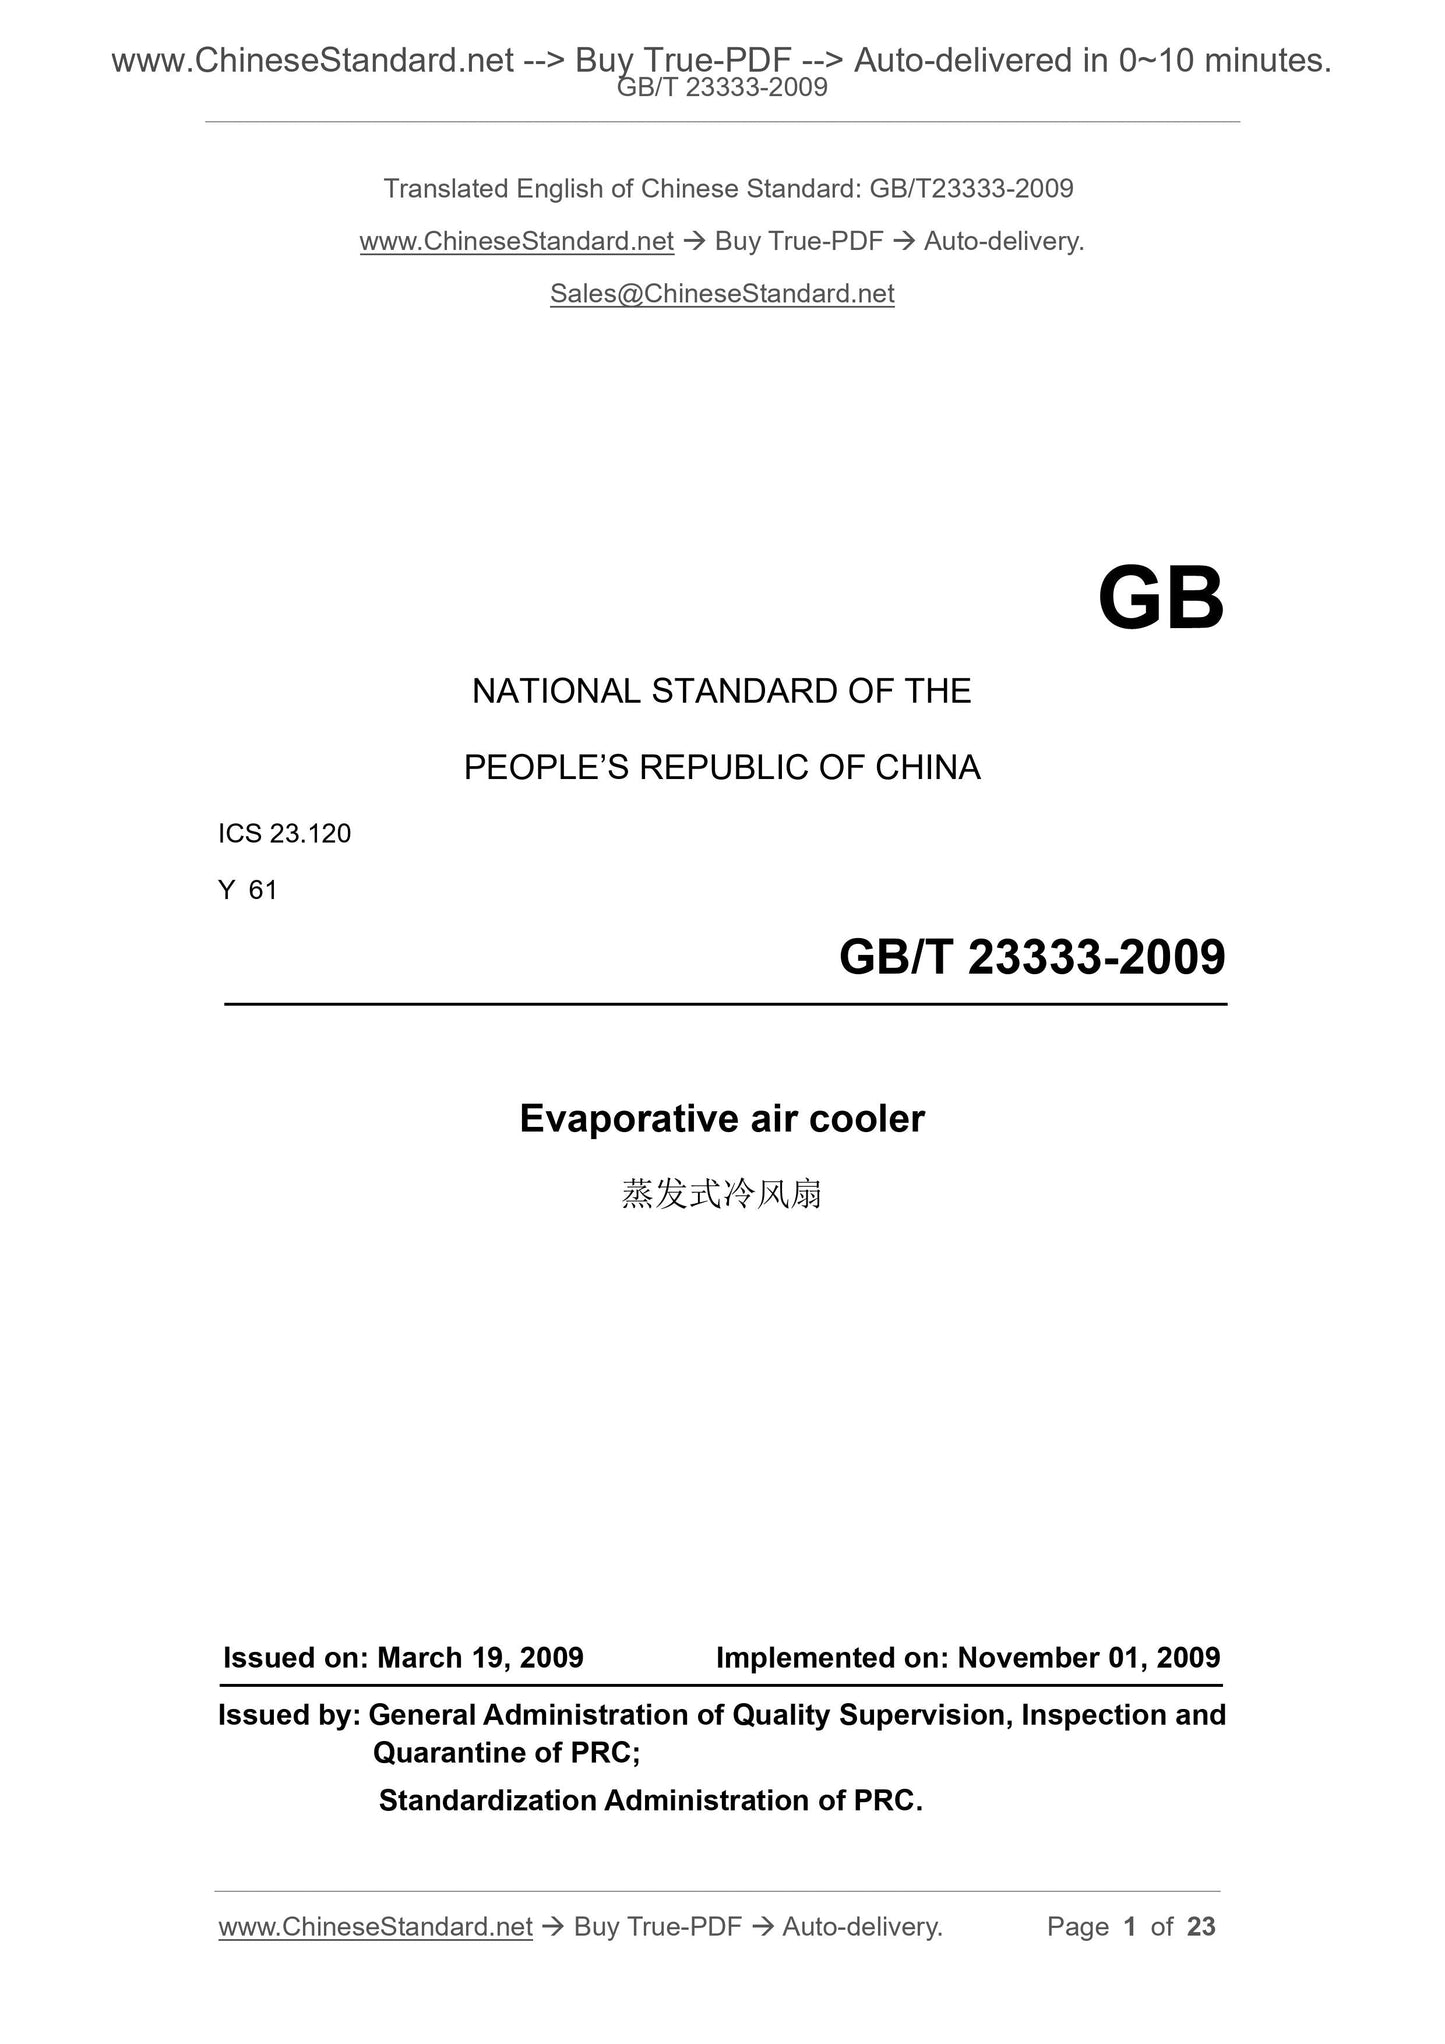 GB/T 23333-2009 Page 1